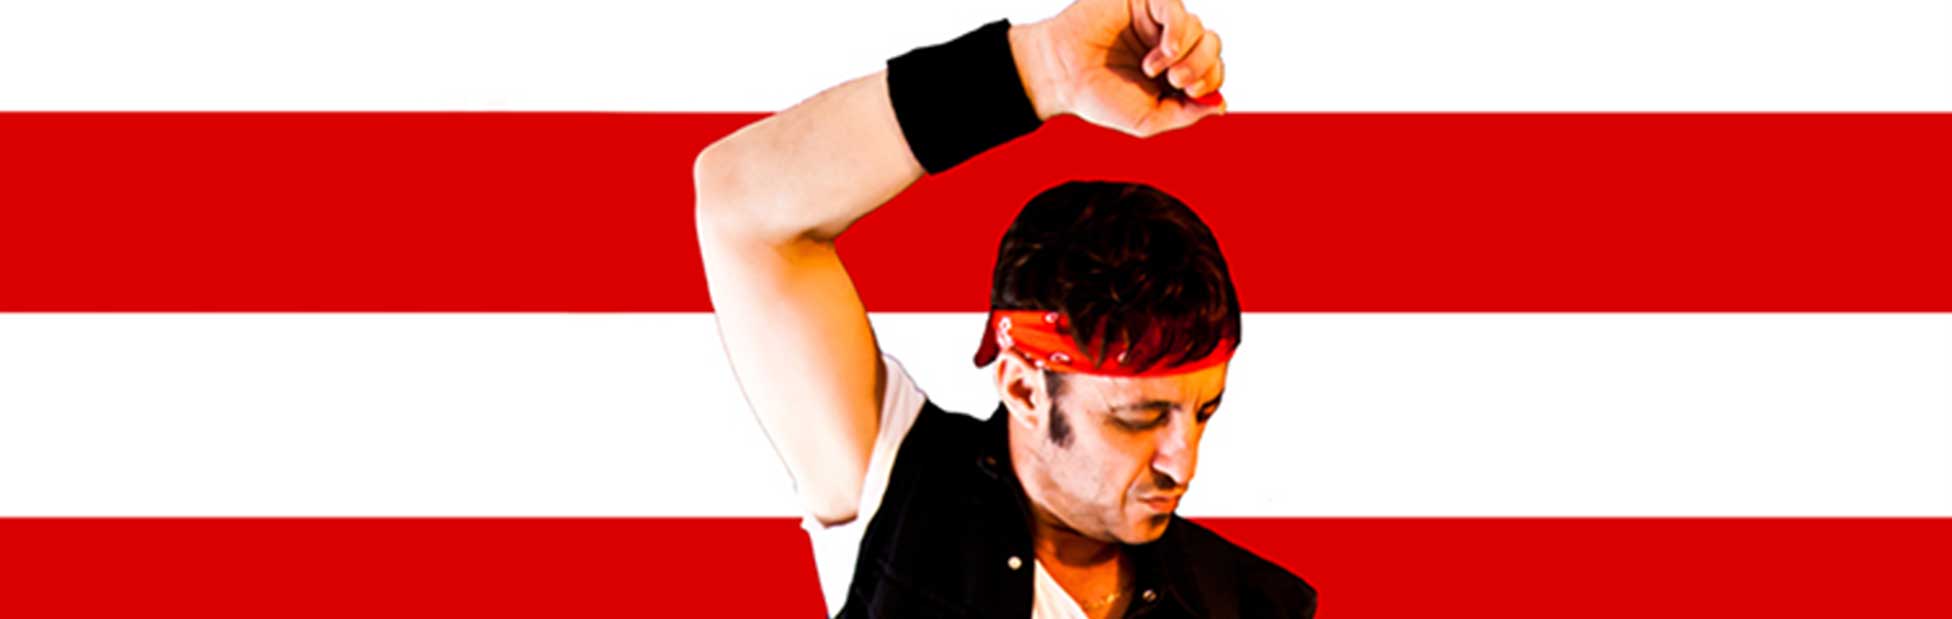 Bruce Springsteen tribute artist hand up in front of red and white stripes